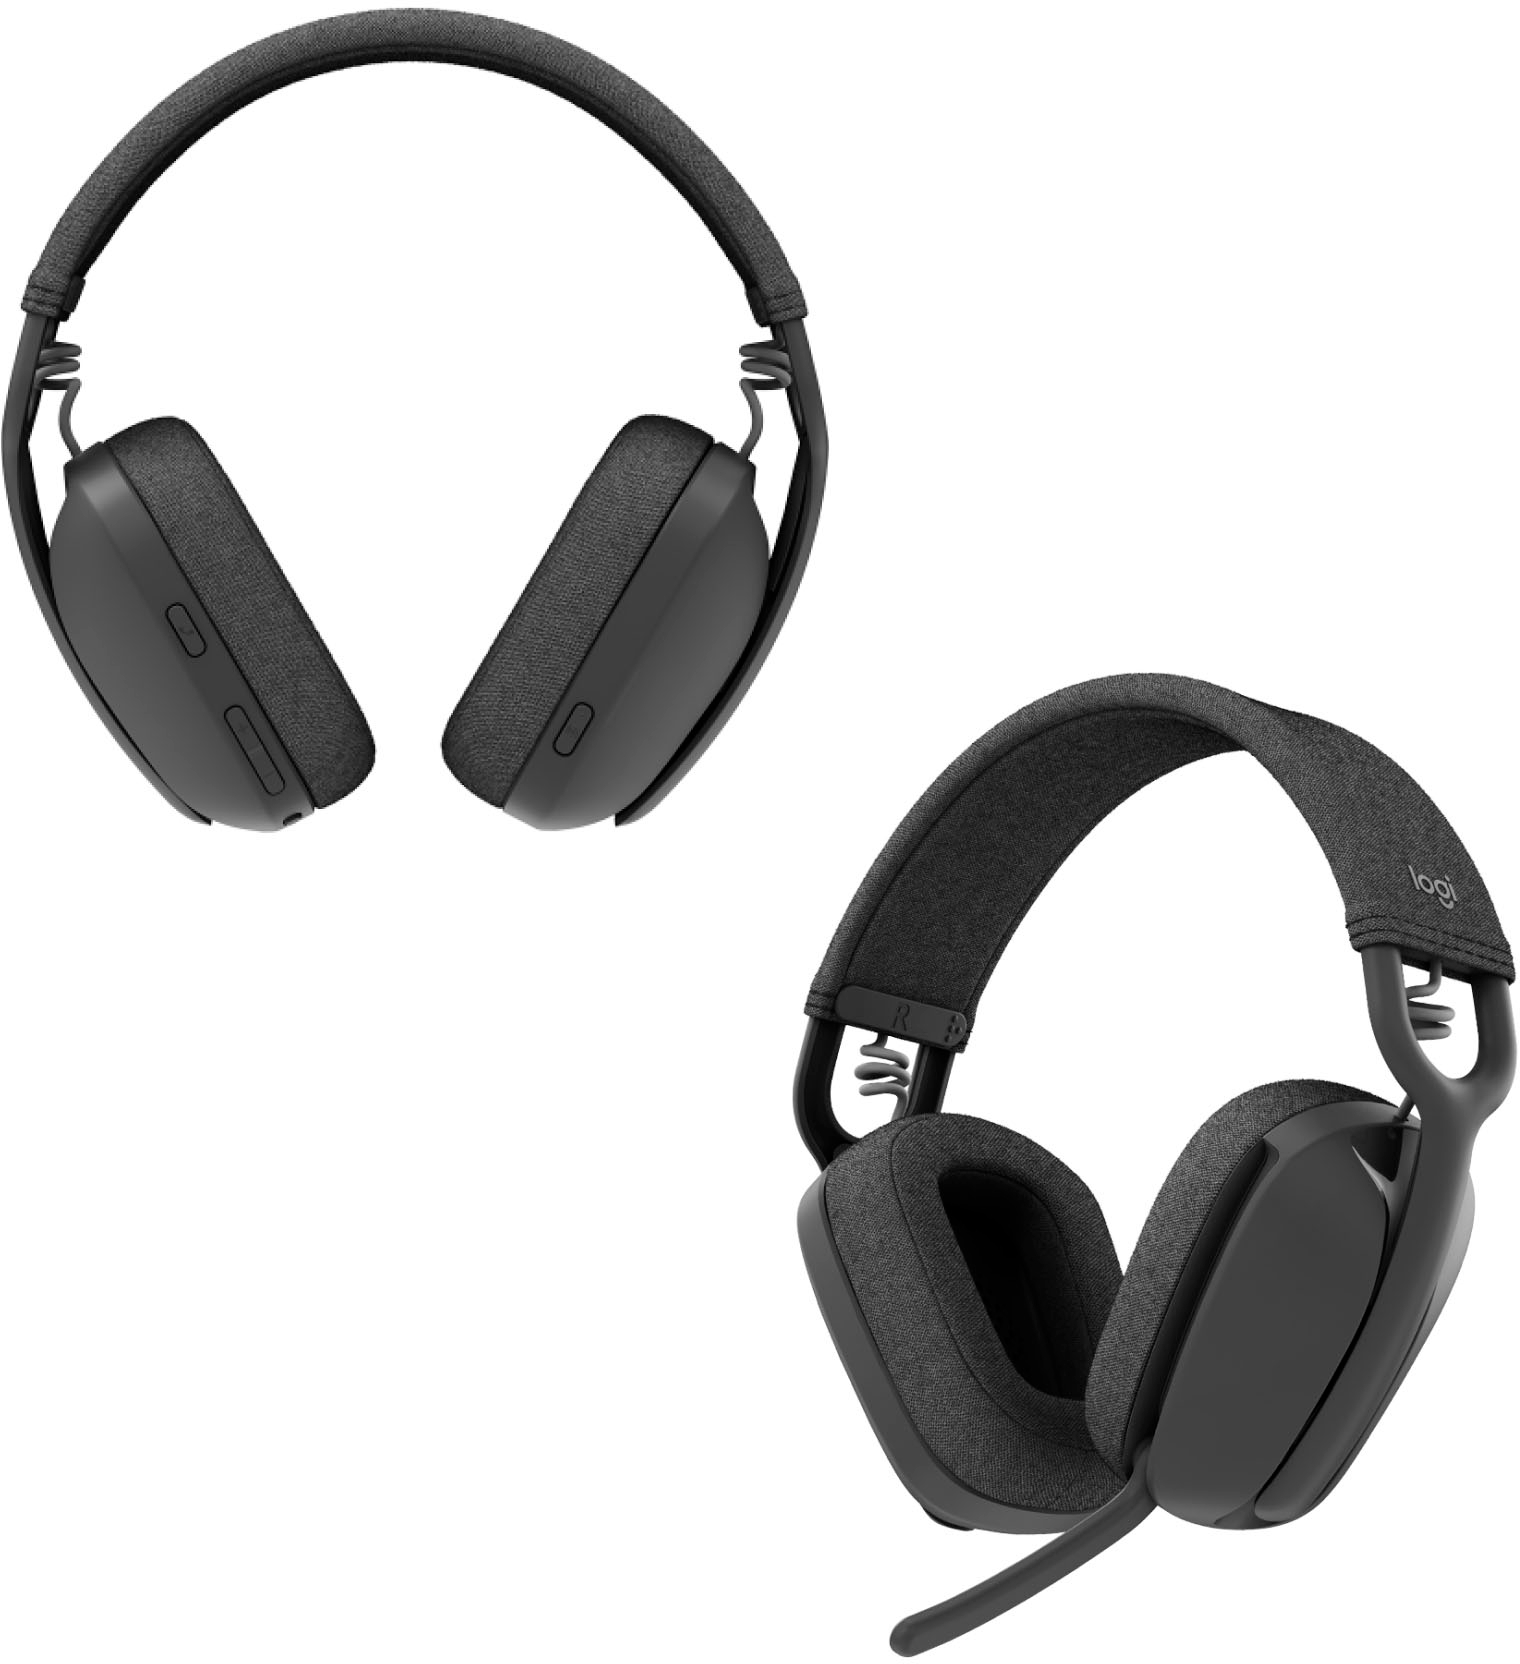 Noise-Cancelling Zone Buy Best Headphones with Over Bluetooth 100 Microphone Ear 981-001256 Vibe Graphite - Logitech